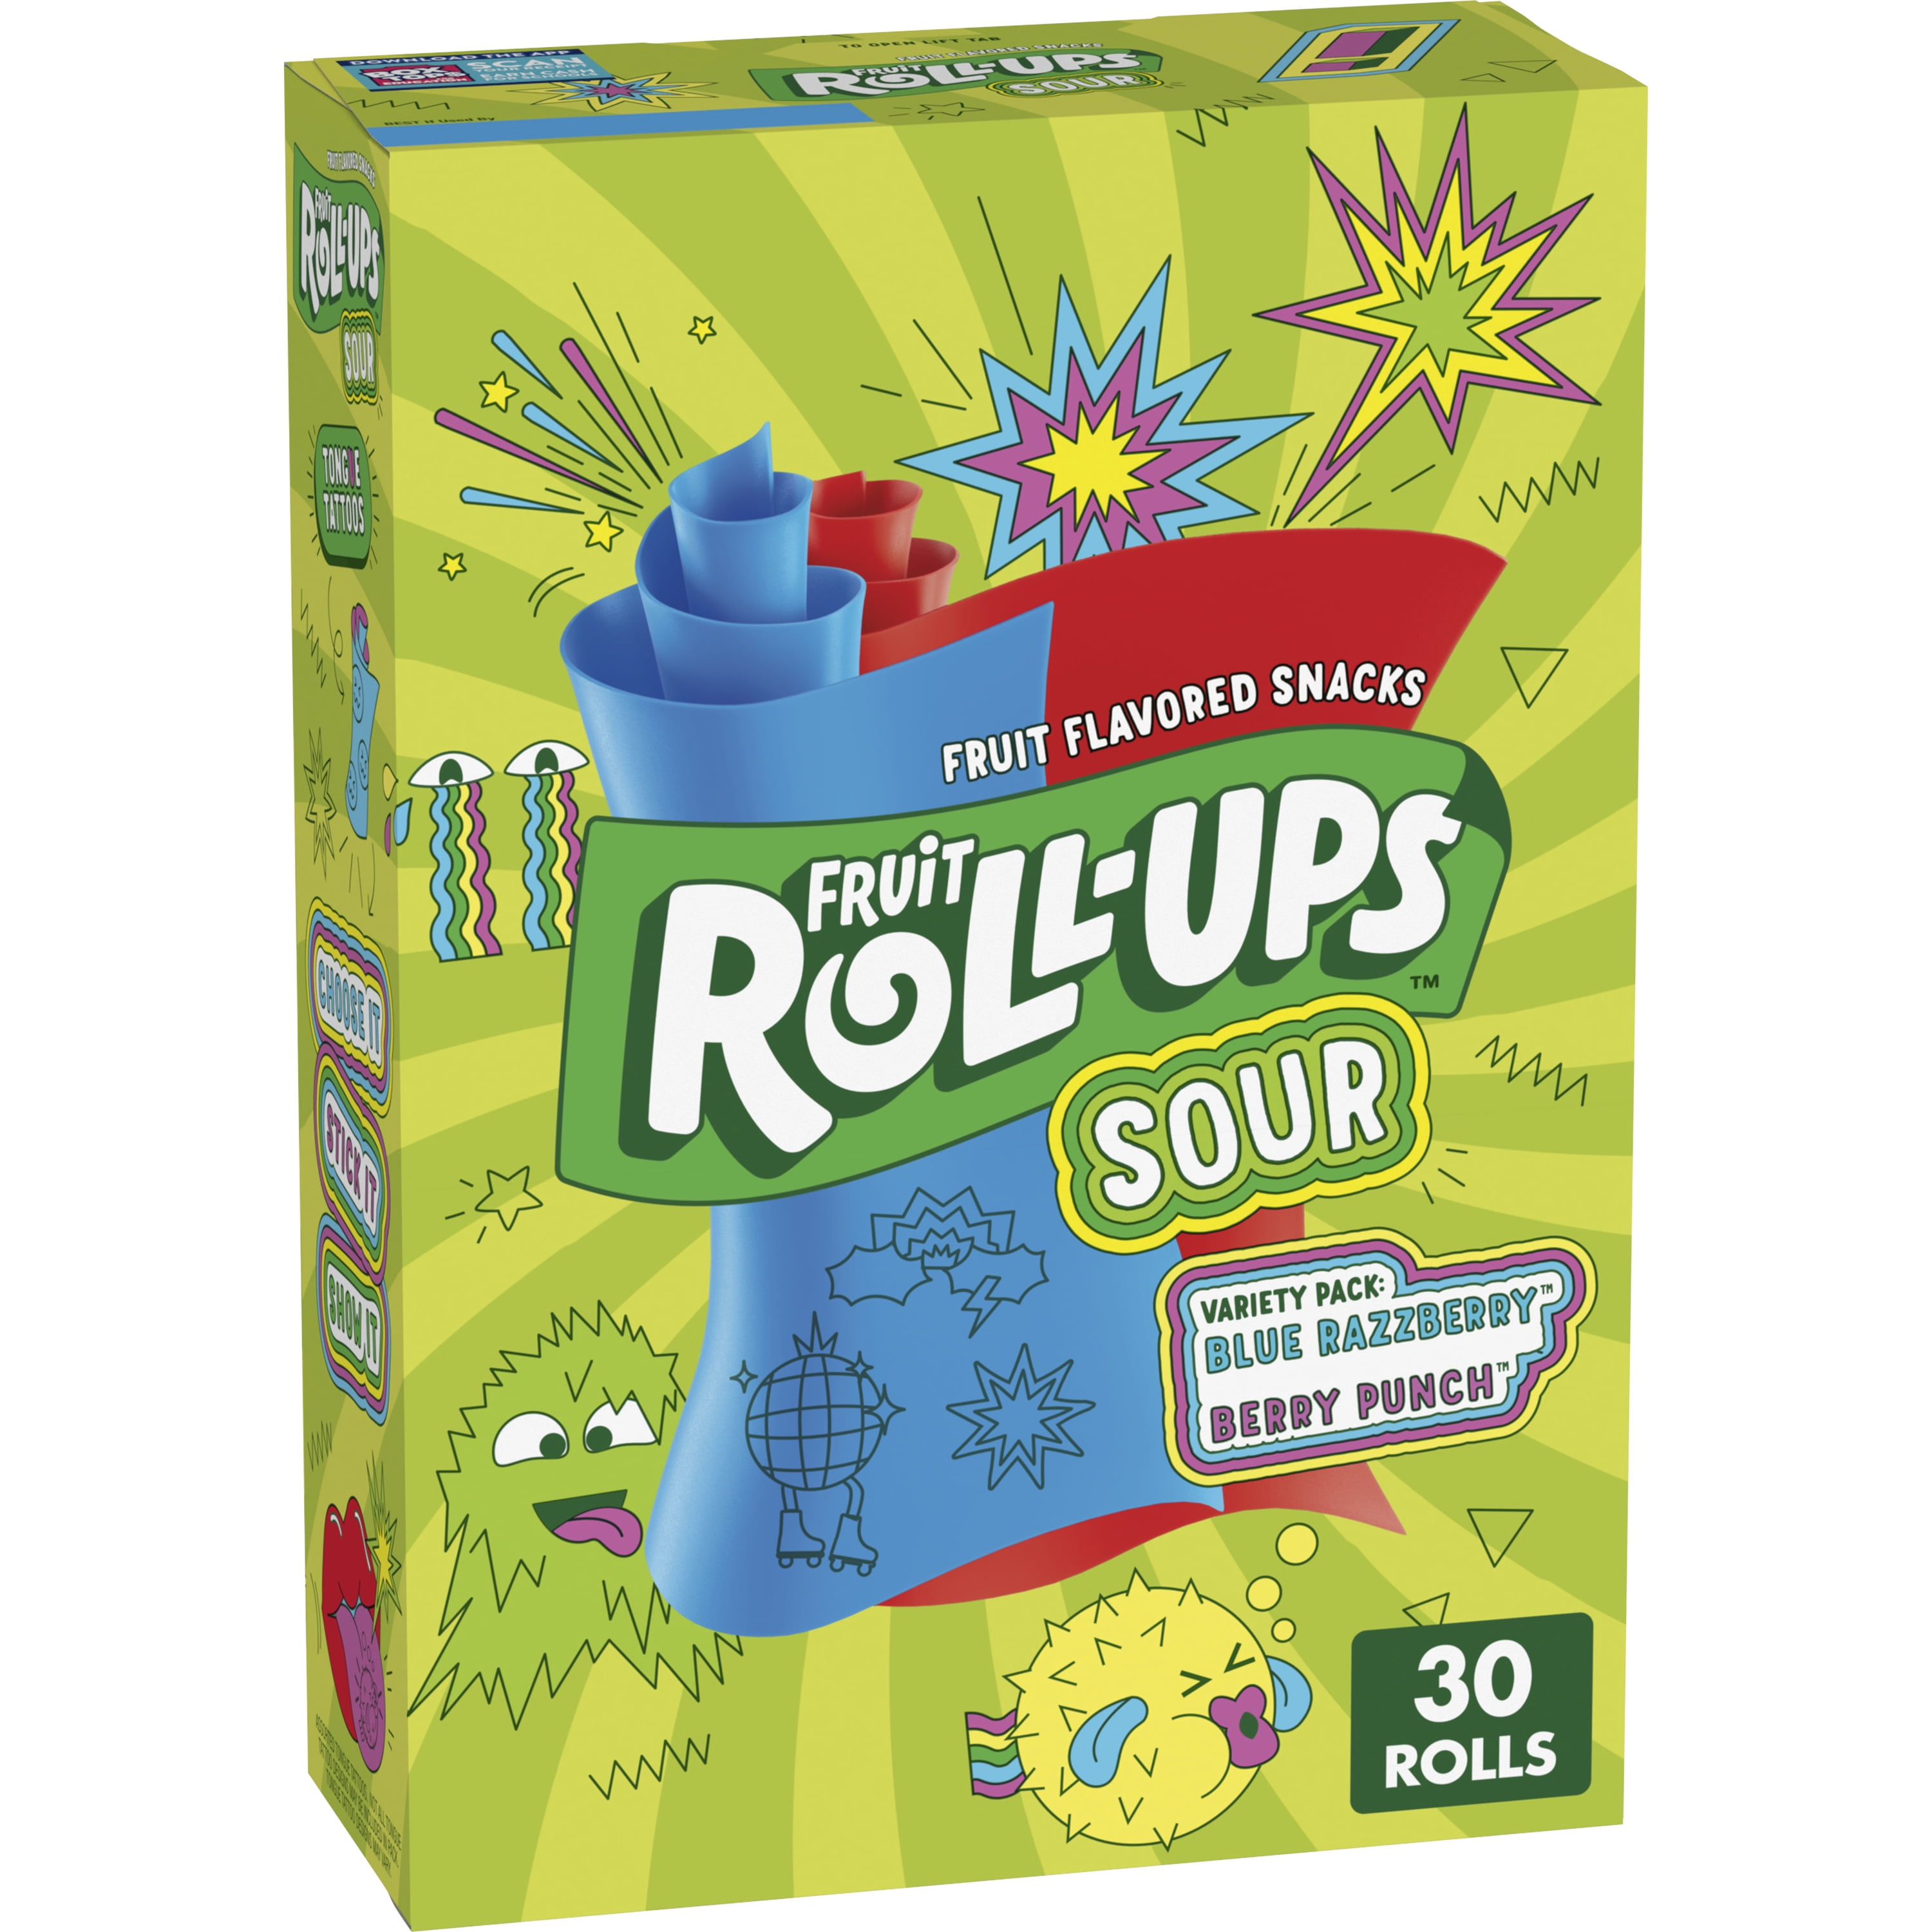 Fruit Roll-Ups Sour Fruit Flavored Snacks, Variety Pack, 15 oz (30 Count)